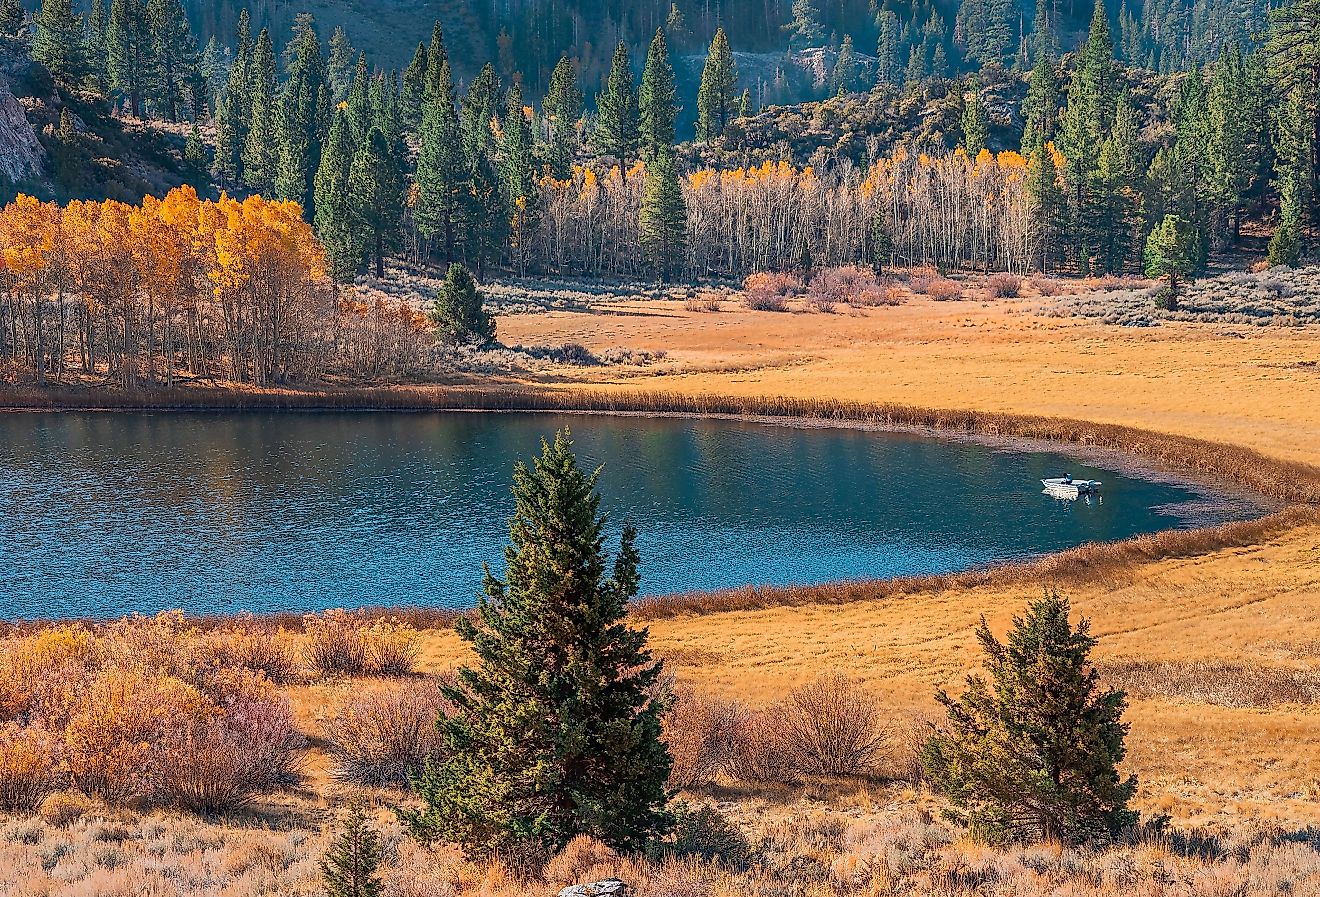 Fisherman floats on Gull Lake in the Autumn morning in the June Lake Loop of California. Image credit Patricia Elaine Thomas via Shutterstock.